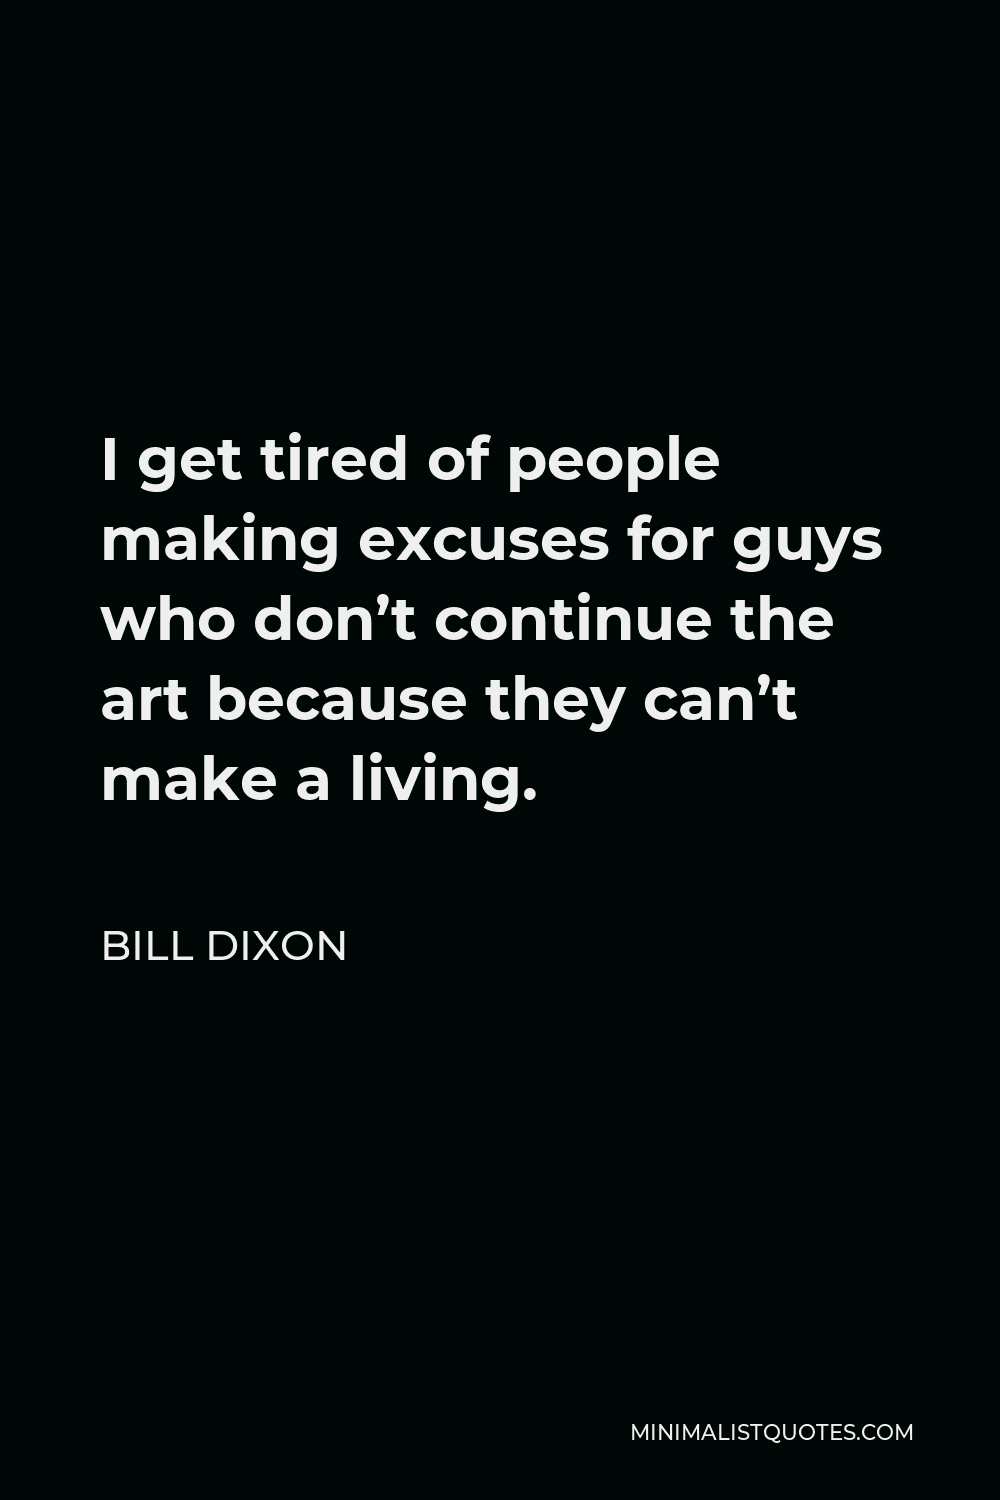 Bill Dixon Quote - I get tired of people making excuses for guys who don’t continue the art because they can’t make a living.